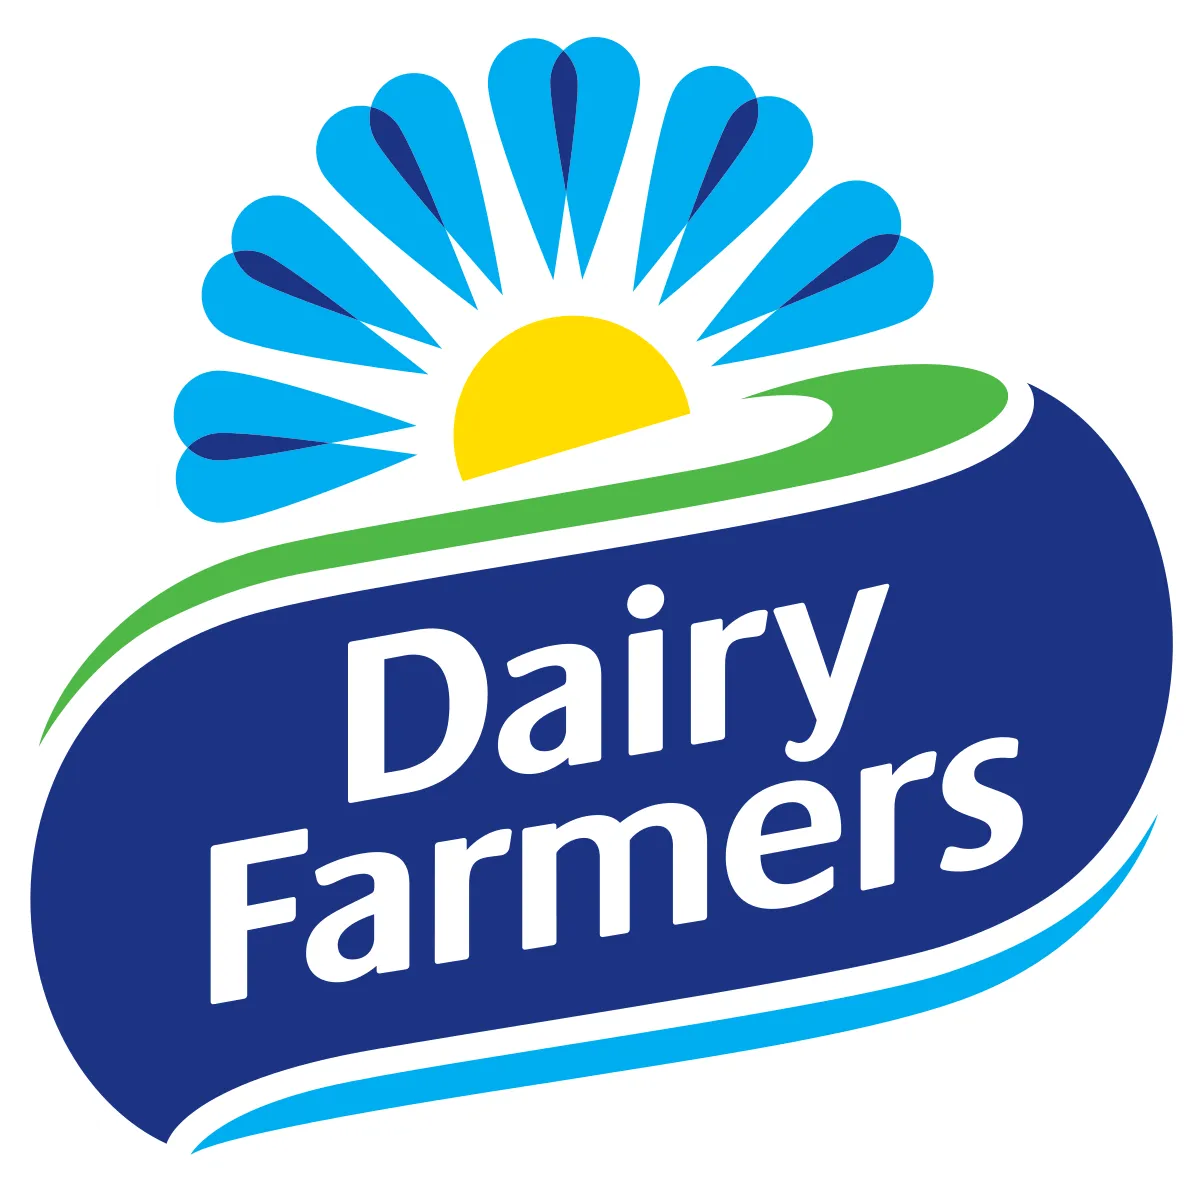 dairy farmers, epic werks media web design and photography,